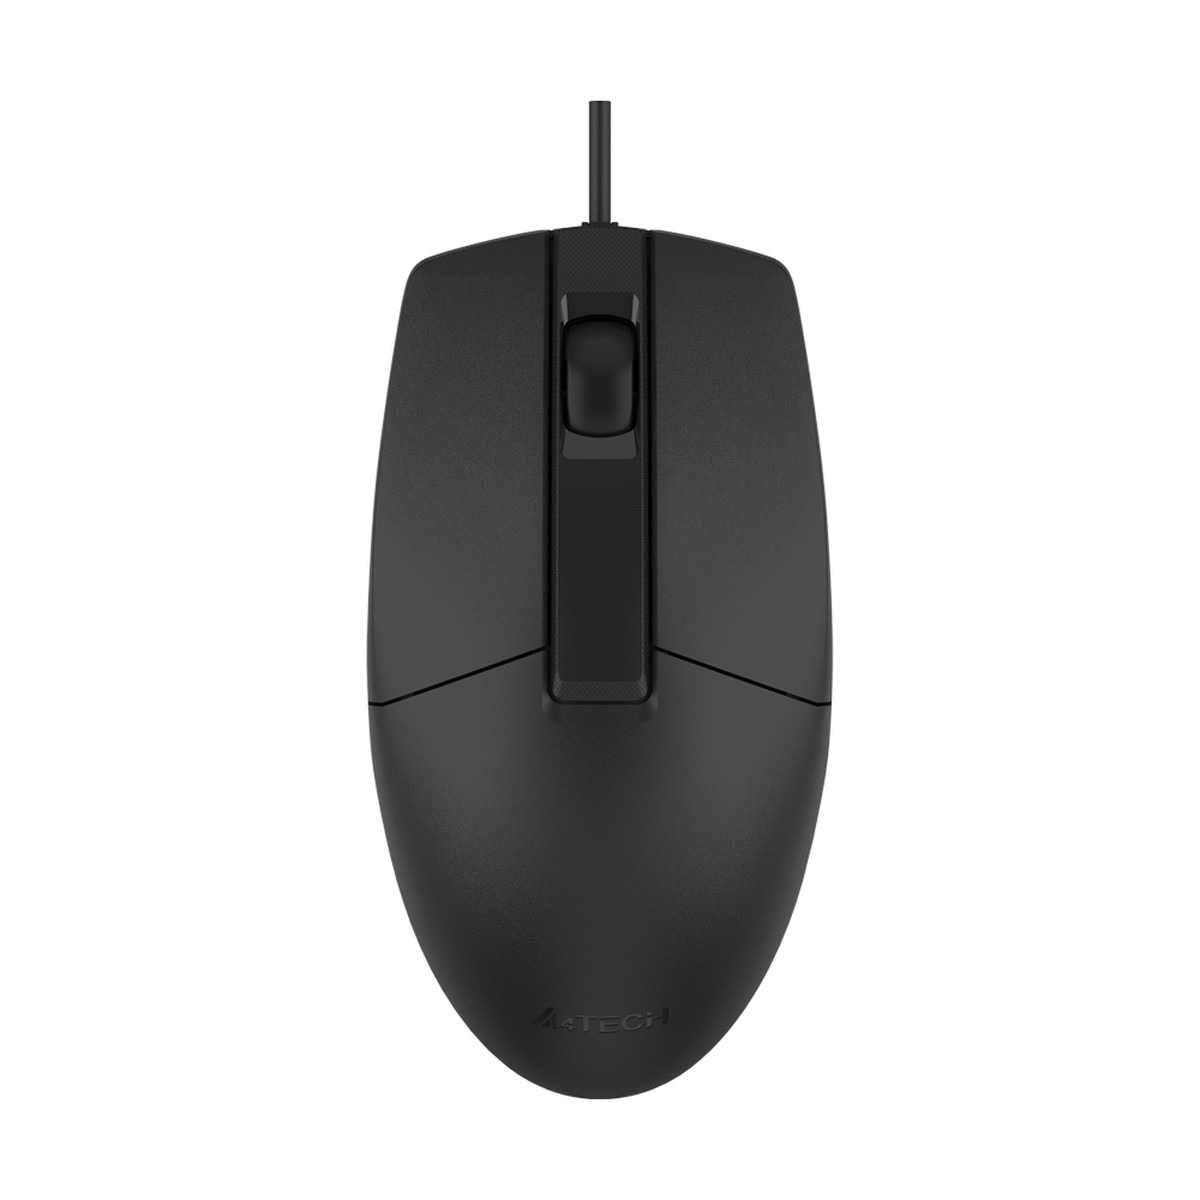 WIRED MOUSE A4TECH OP-330 SILENT CLICK 1200DPI USB, Mouse